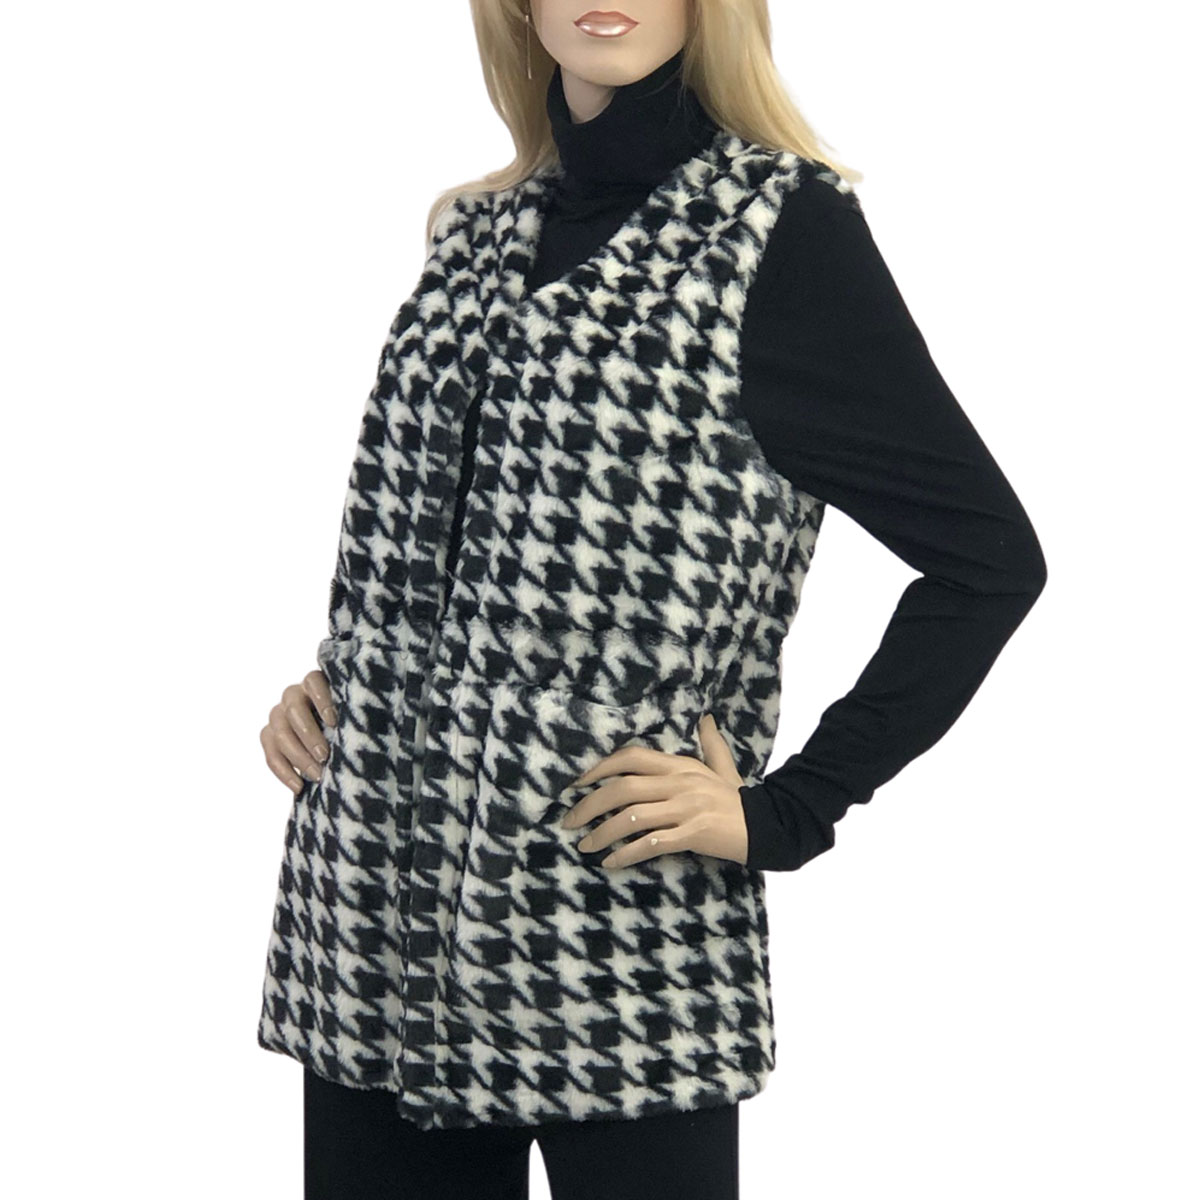 Houndstooth Print Faux Fur Vest 9503 Houndstooth Faux Fur Vest - One Size Fits All